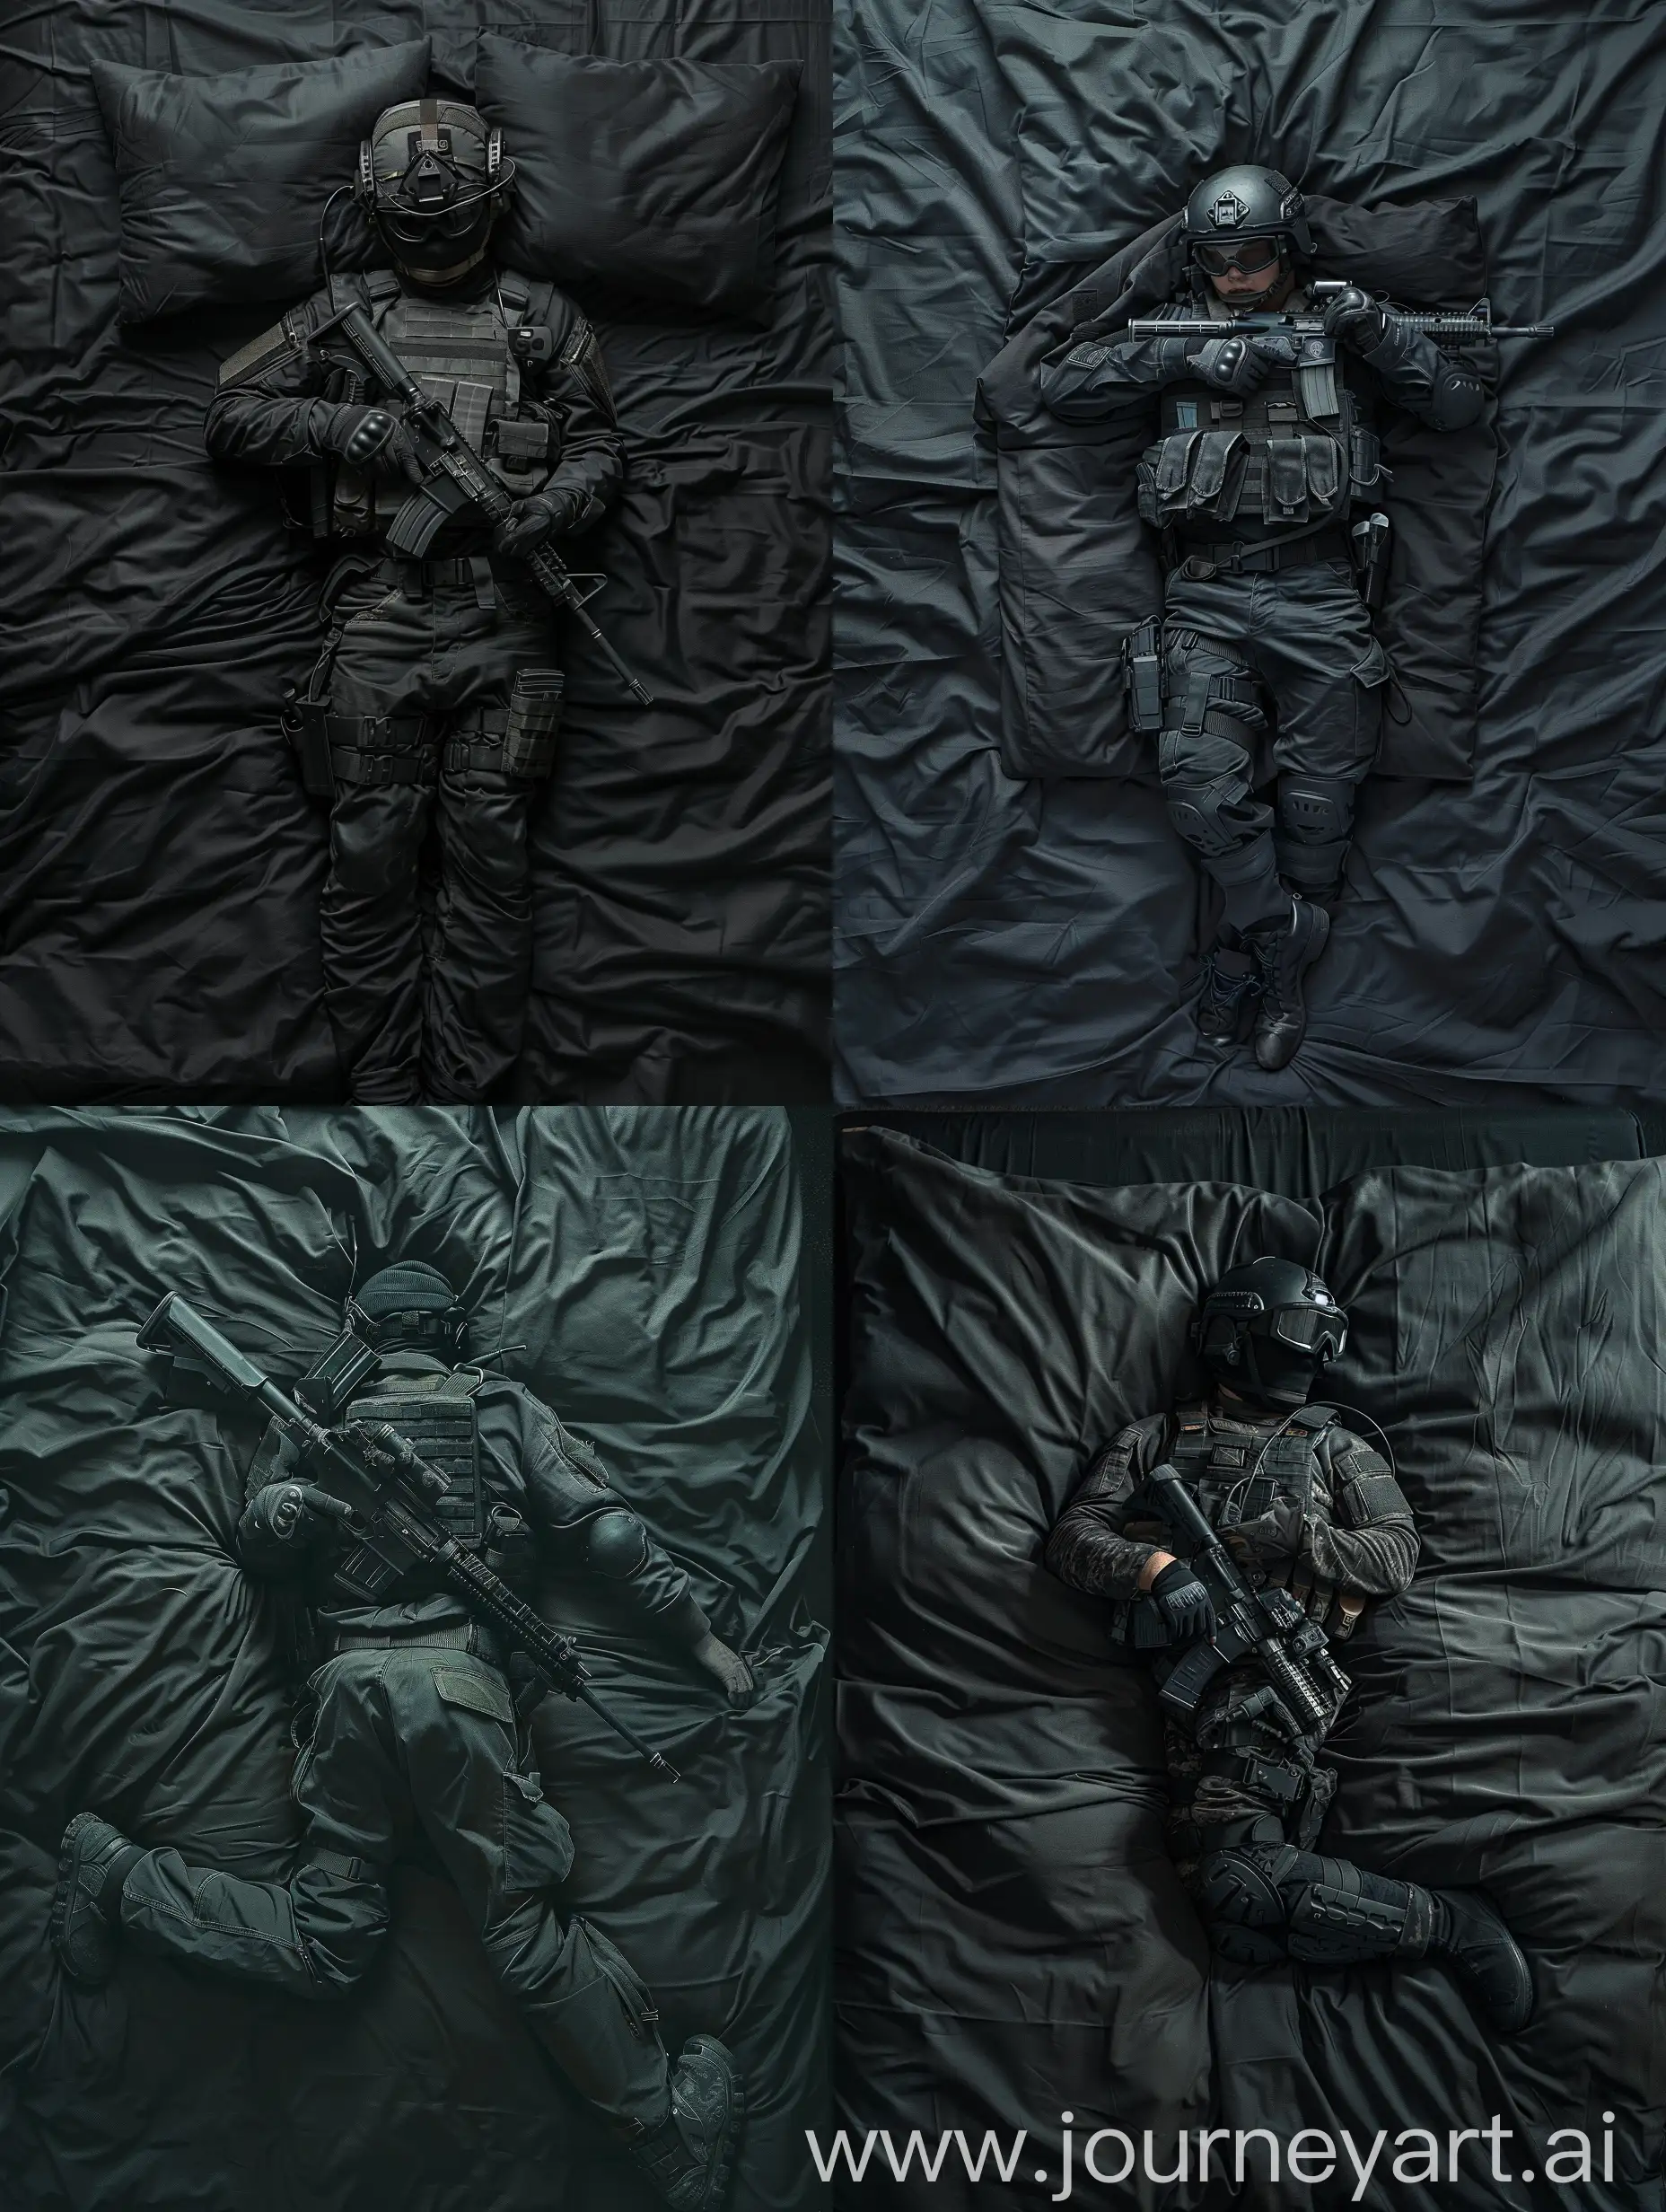 SWAT-Operative-Lying-on-Black-Bed-with-Weapon-and-Balaclava